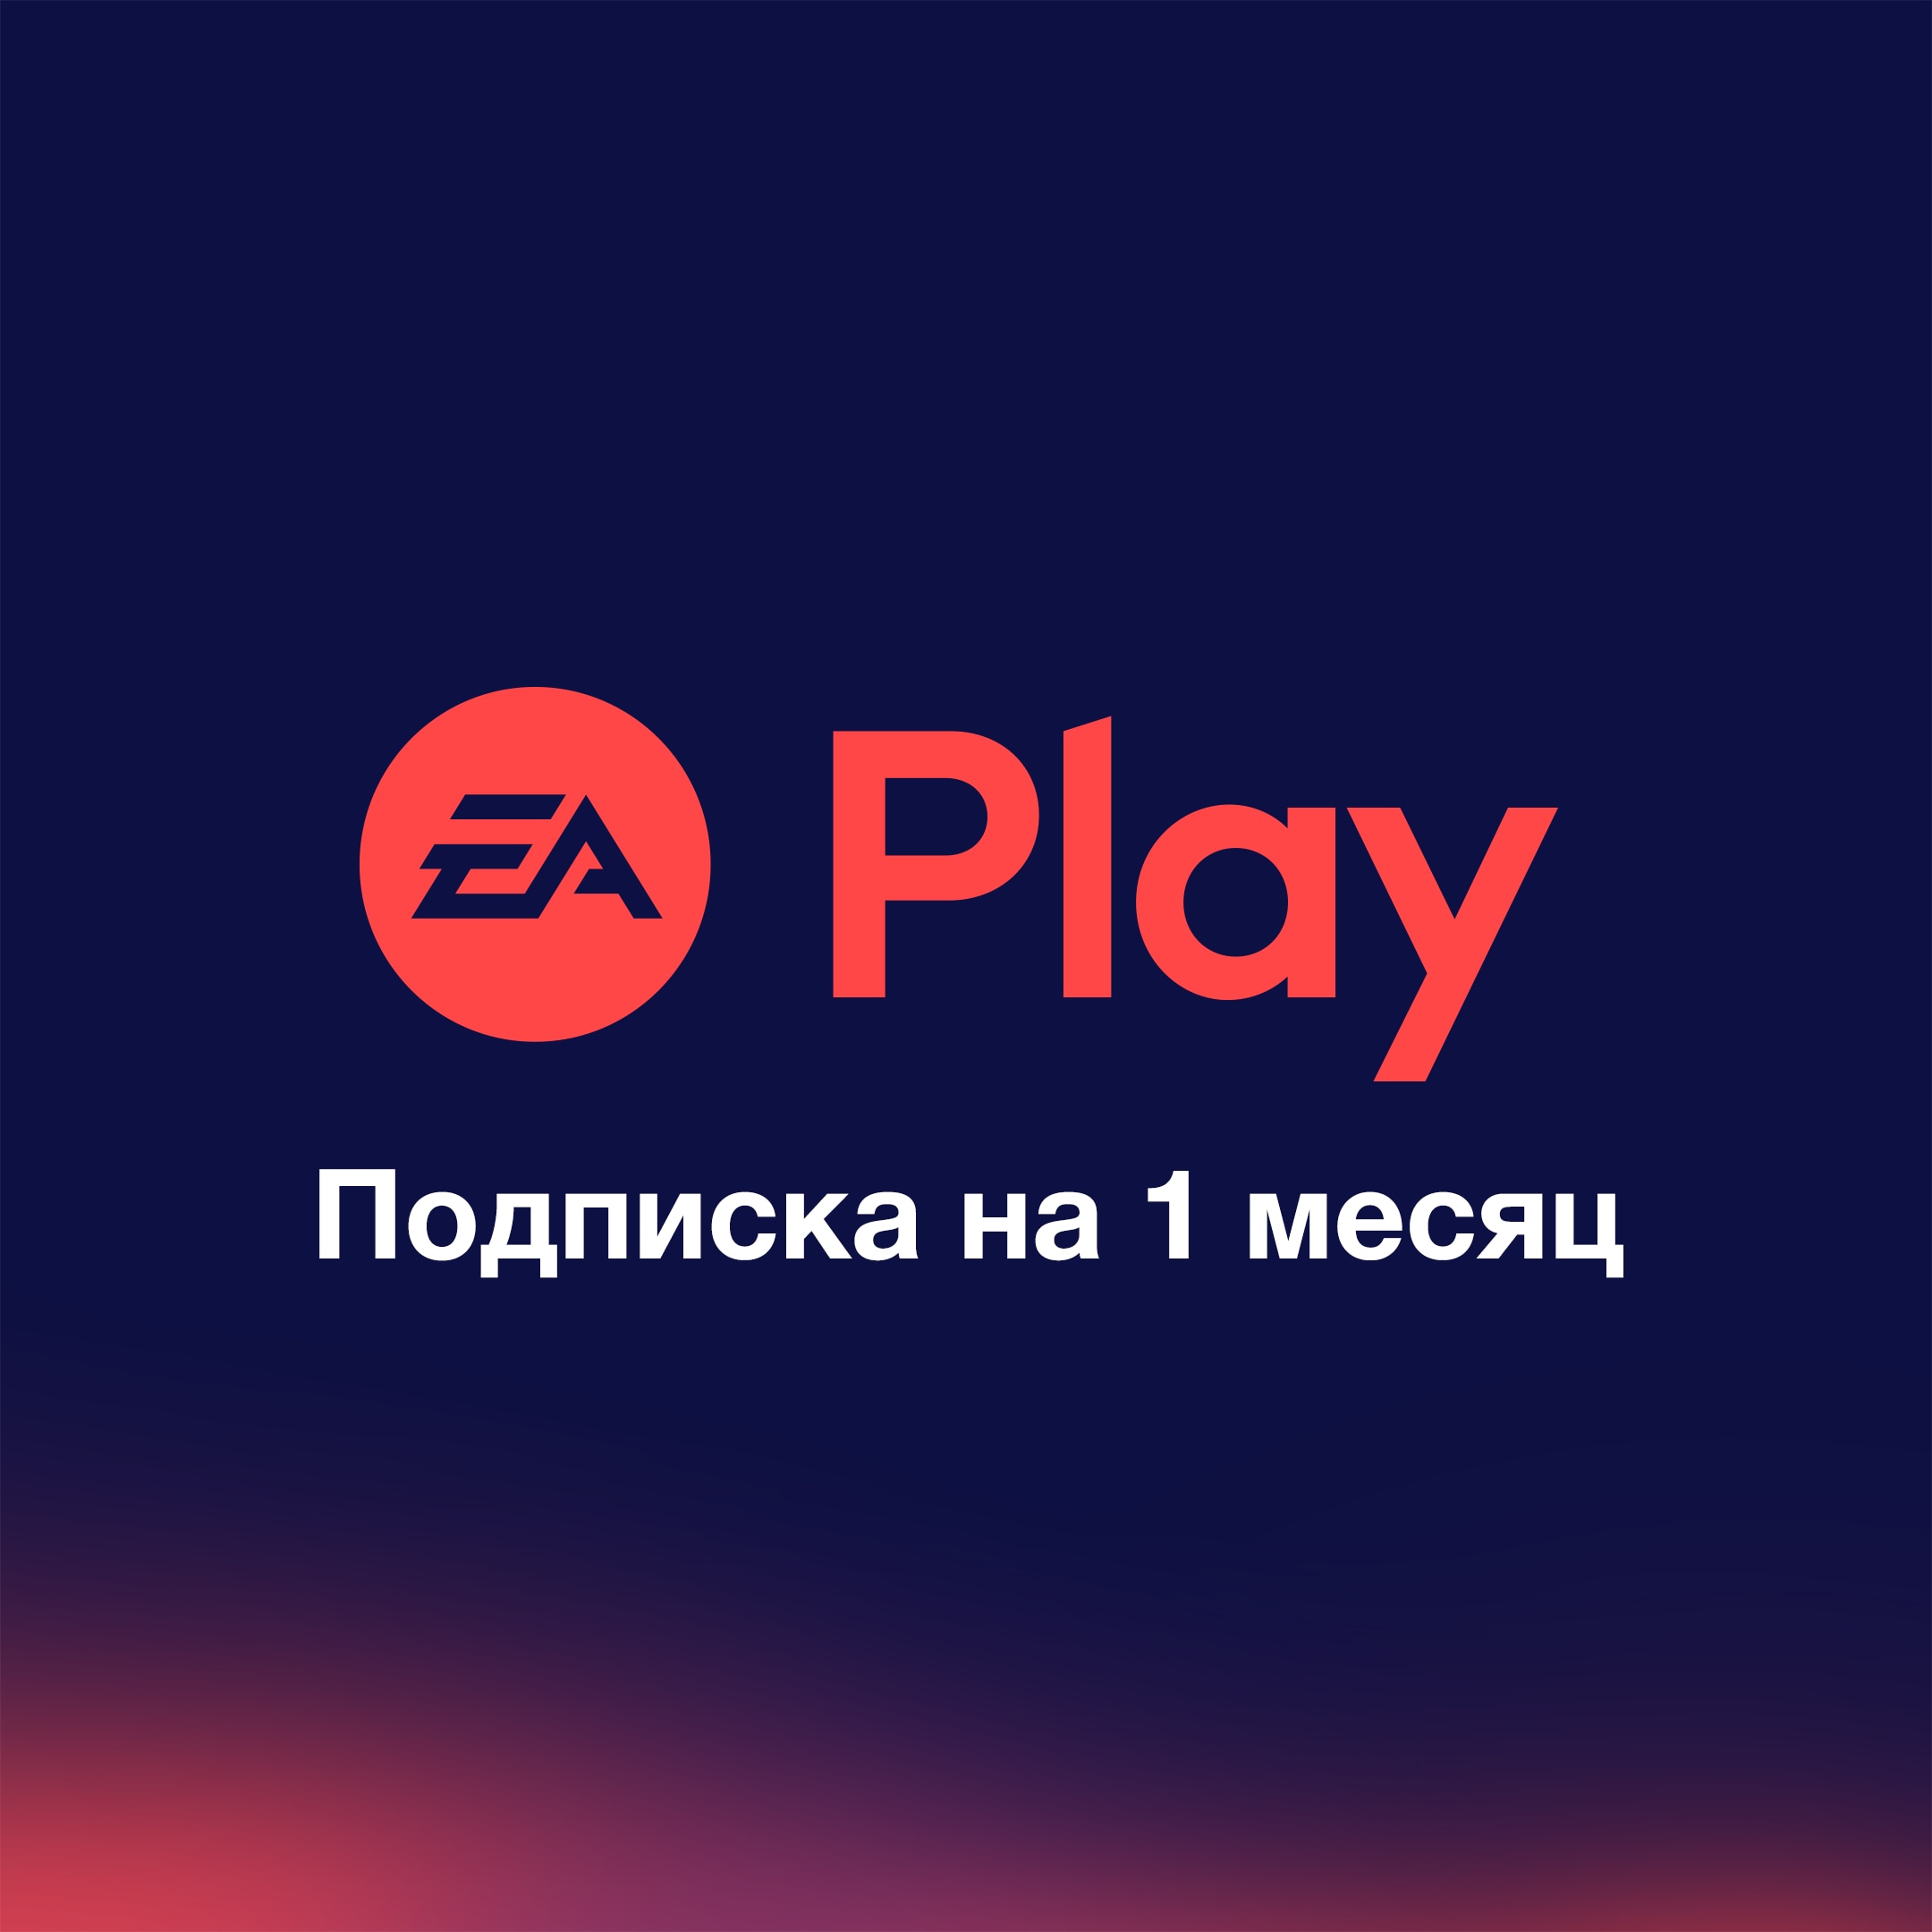 EA PLAY 1 MONTH PS4 PS5 PLAYSTATION TURKEY